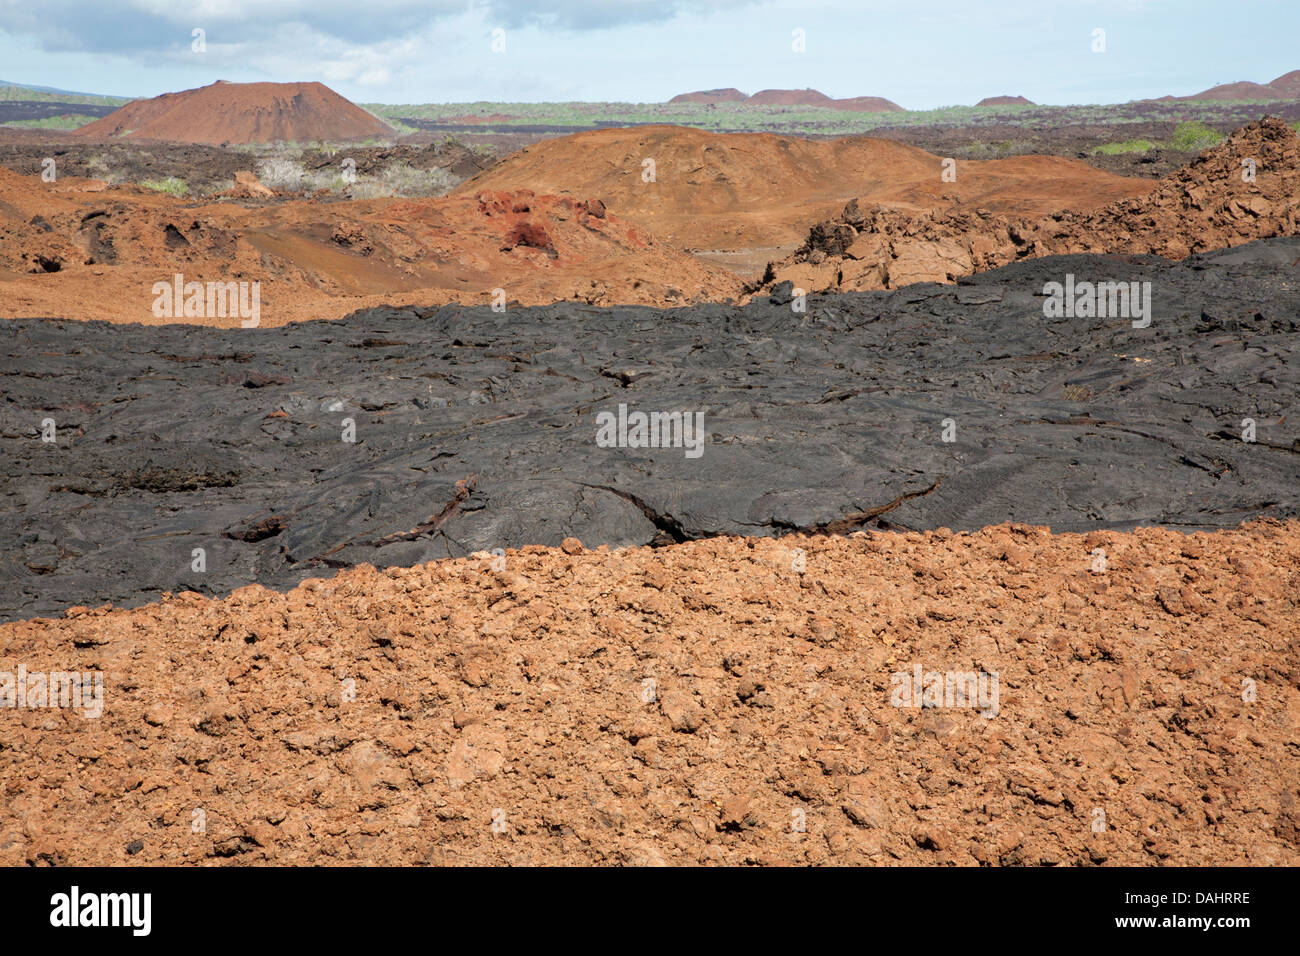 Hardened younger black pahoehoe lava flow on top of older oxidized and fragmented red aa lava flow with volcanic cones on Santiago Island, Galapagos Stock Photo